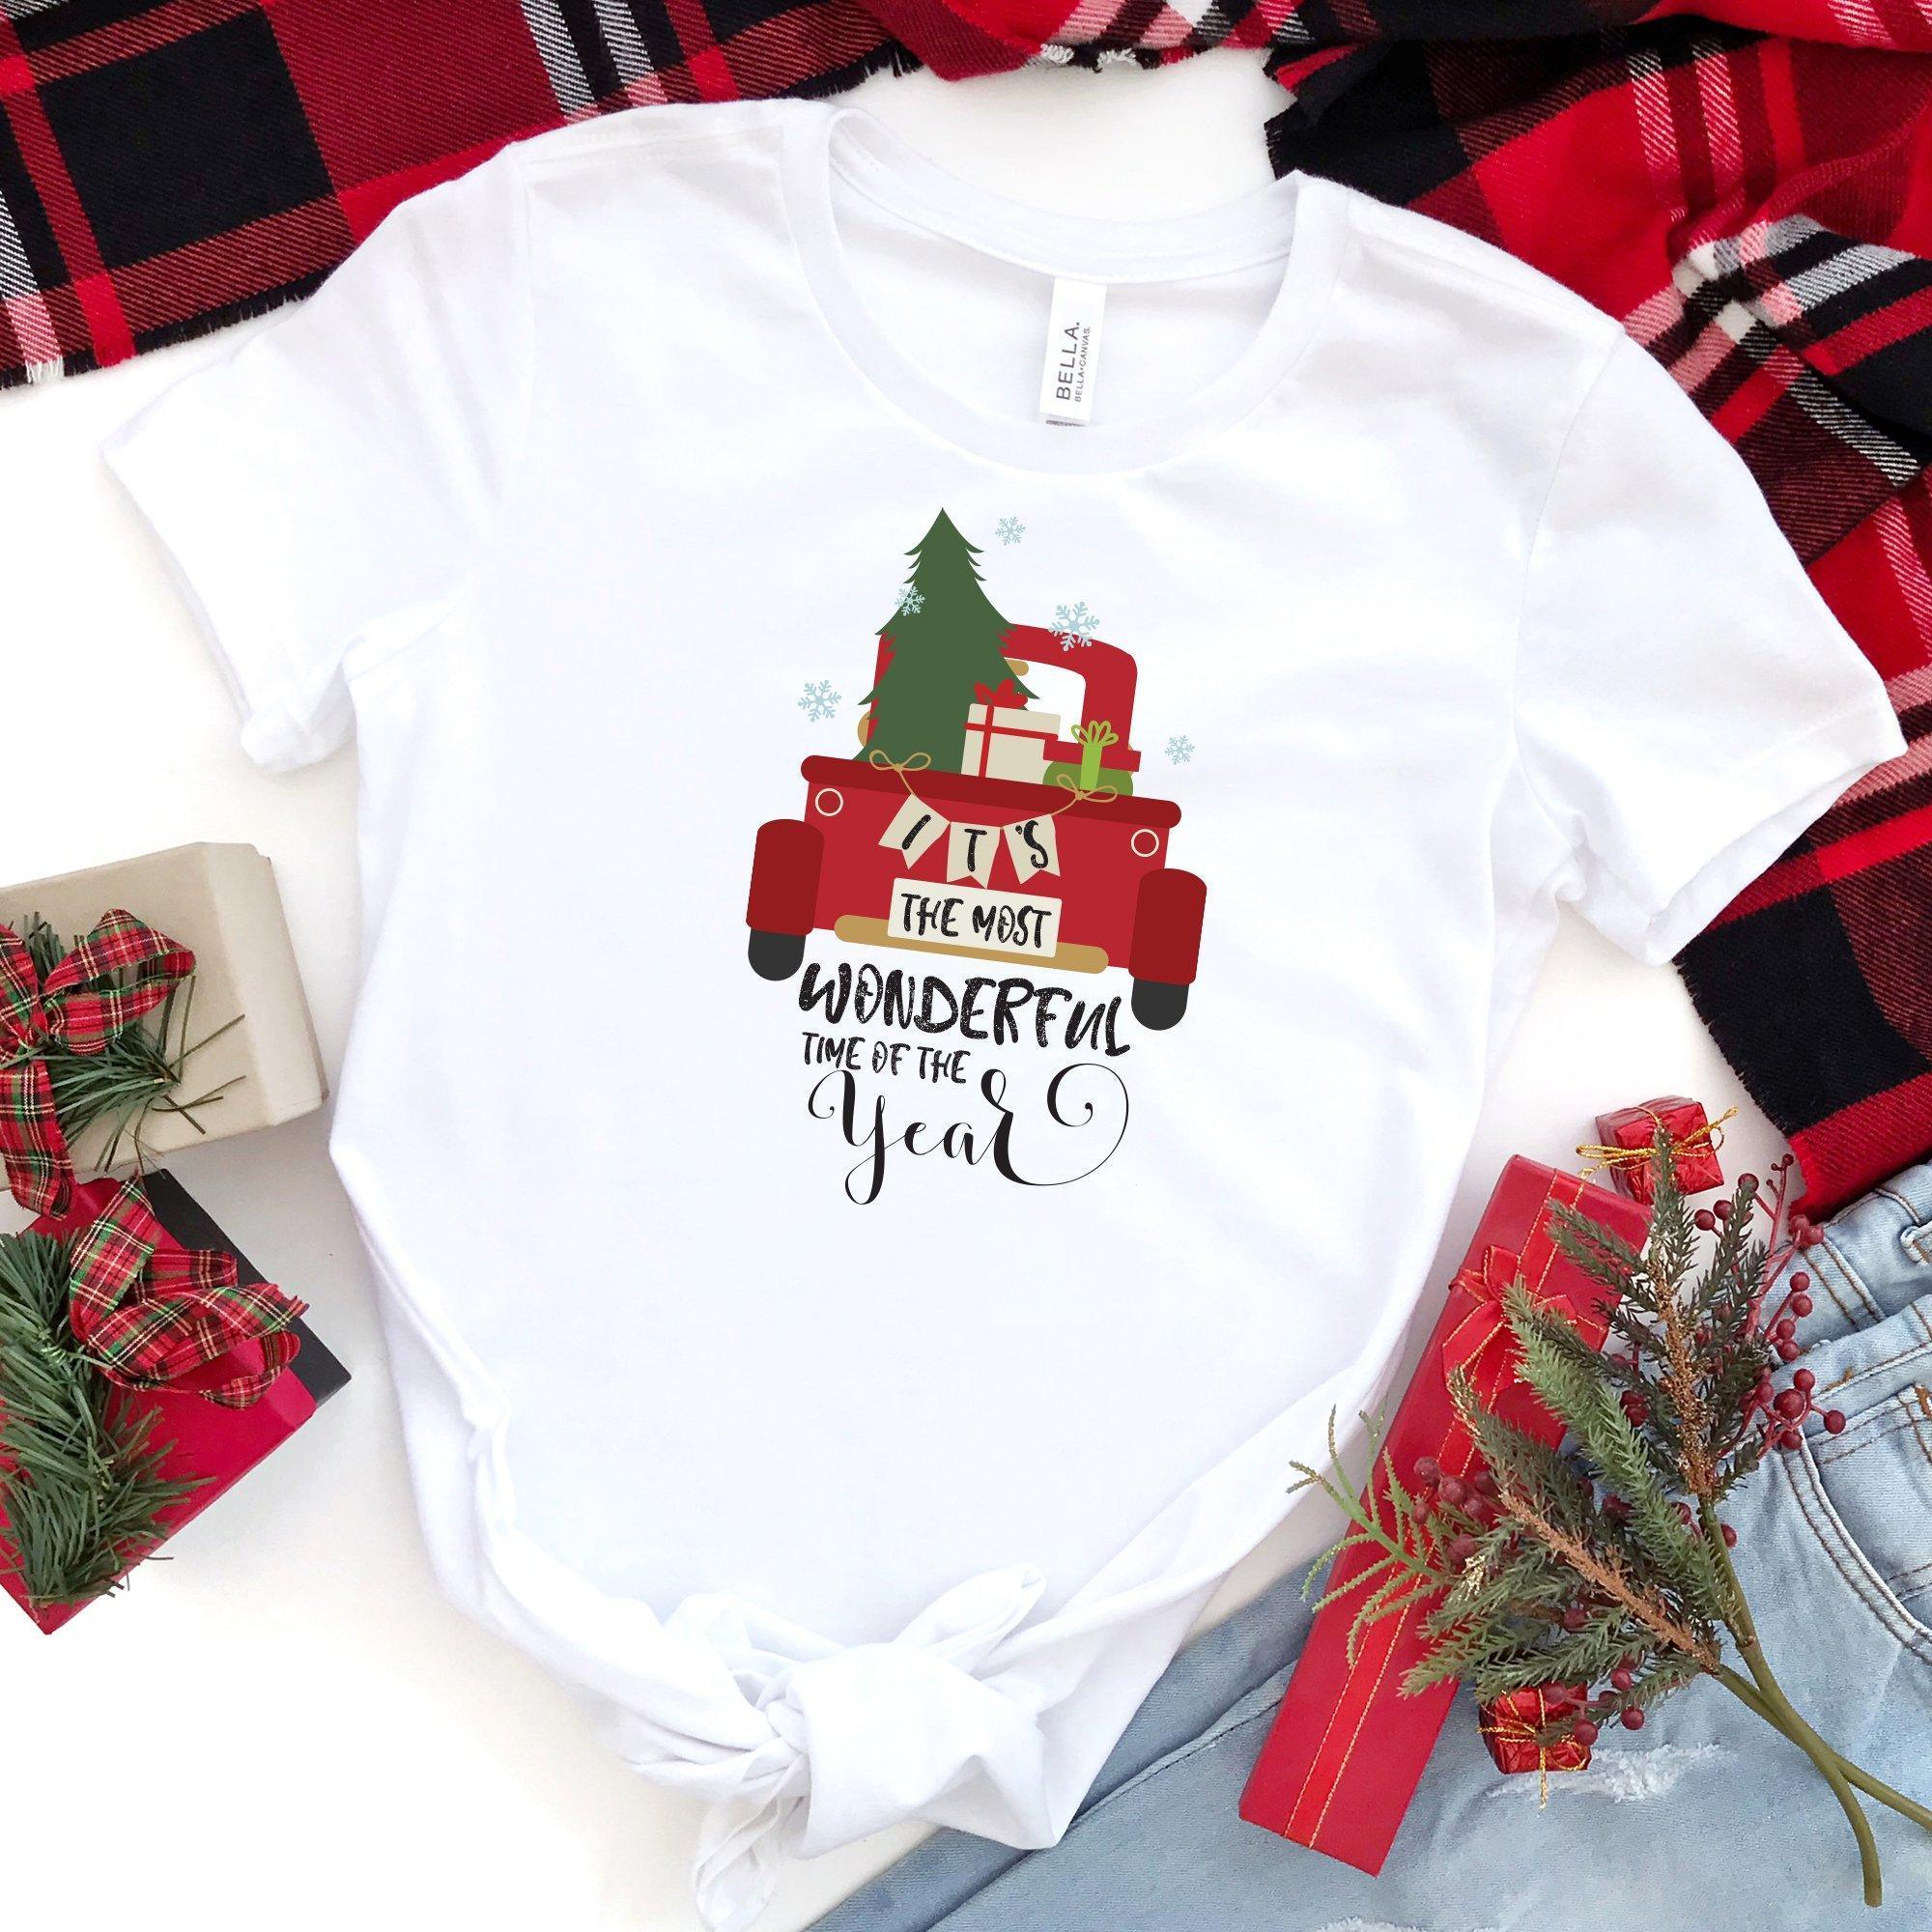 It's the most wonderful time of the year t-shirt with red Christmas tree truck, Unisex size